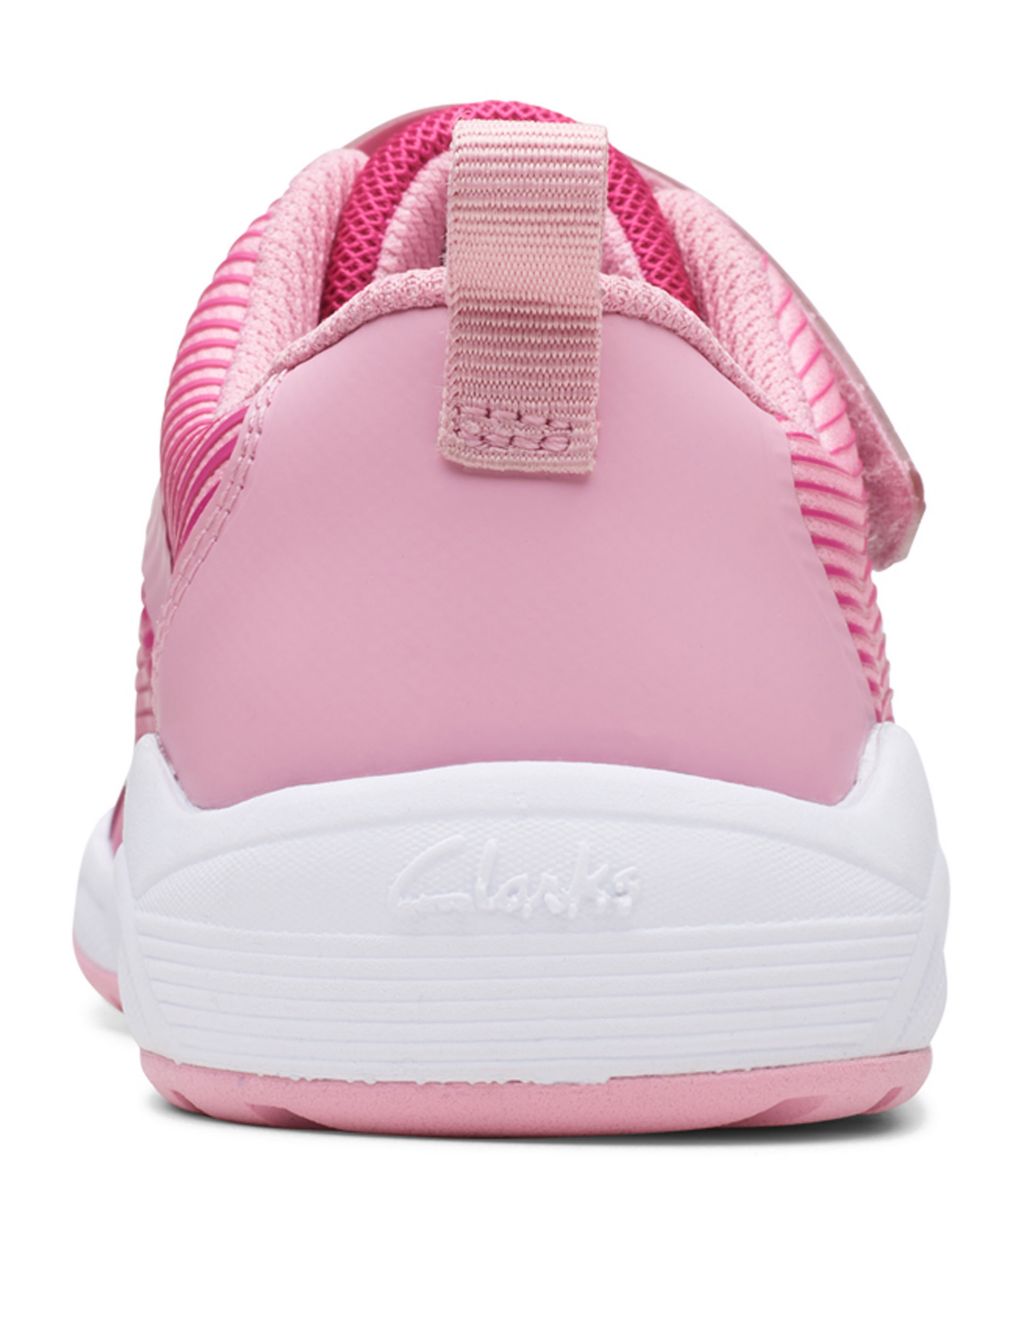 Kids' Ombre Riptape Trainers (7 Small - 12½ Small) image 3